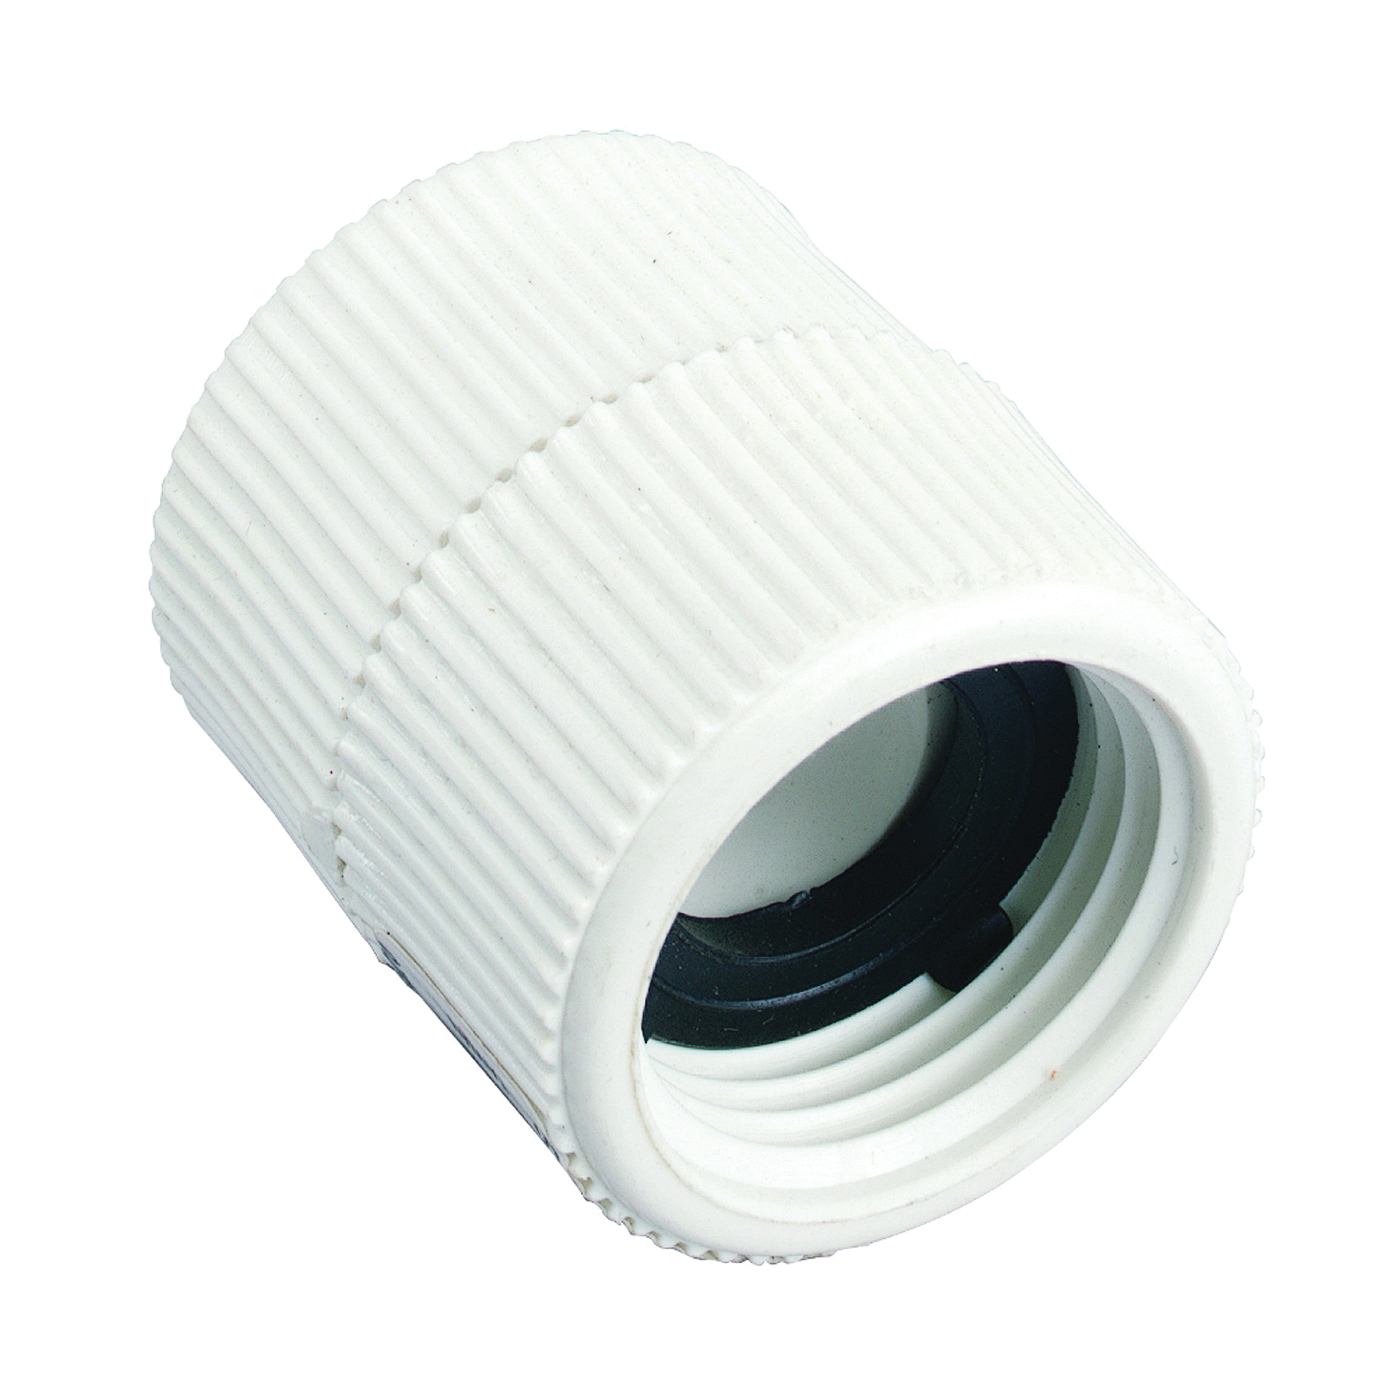 53363 Hose to Pipe Adapter, 3/4 x 3/4 in, FNPT x FHT, Polyvinyl Chloride, White